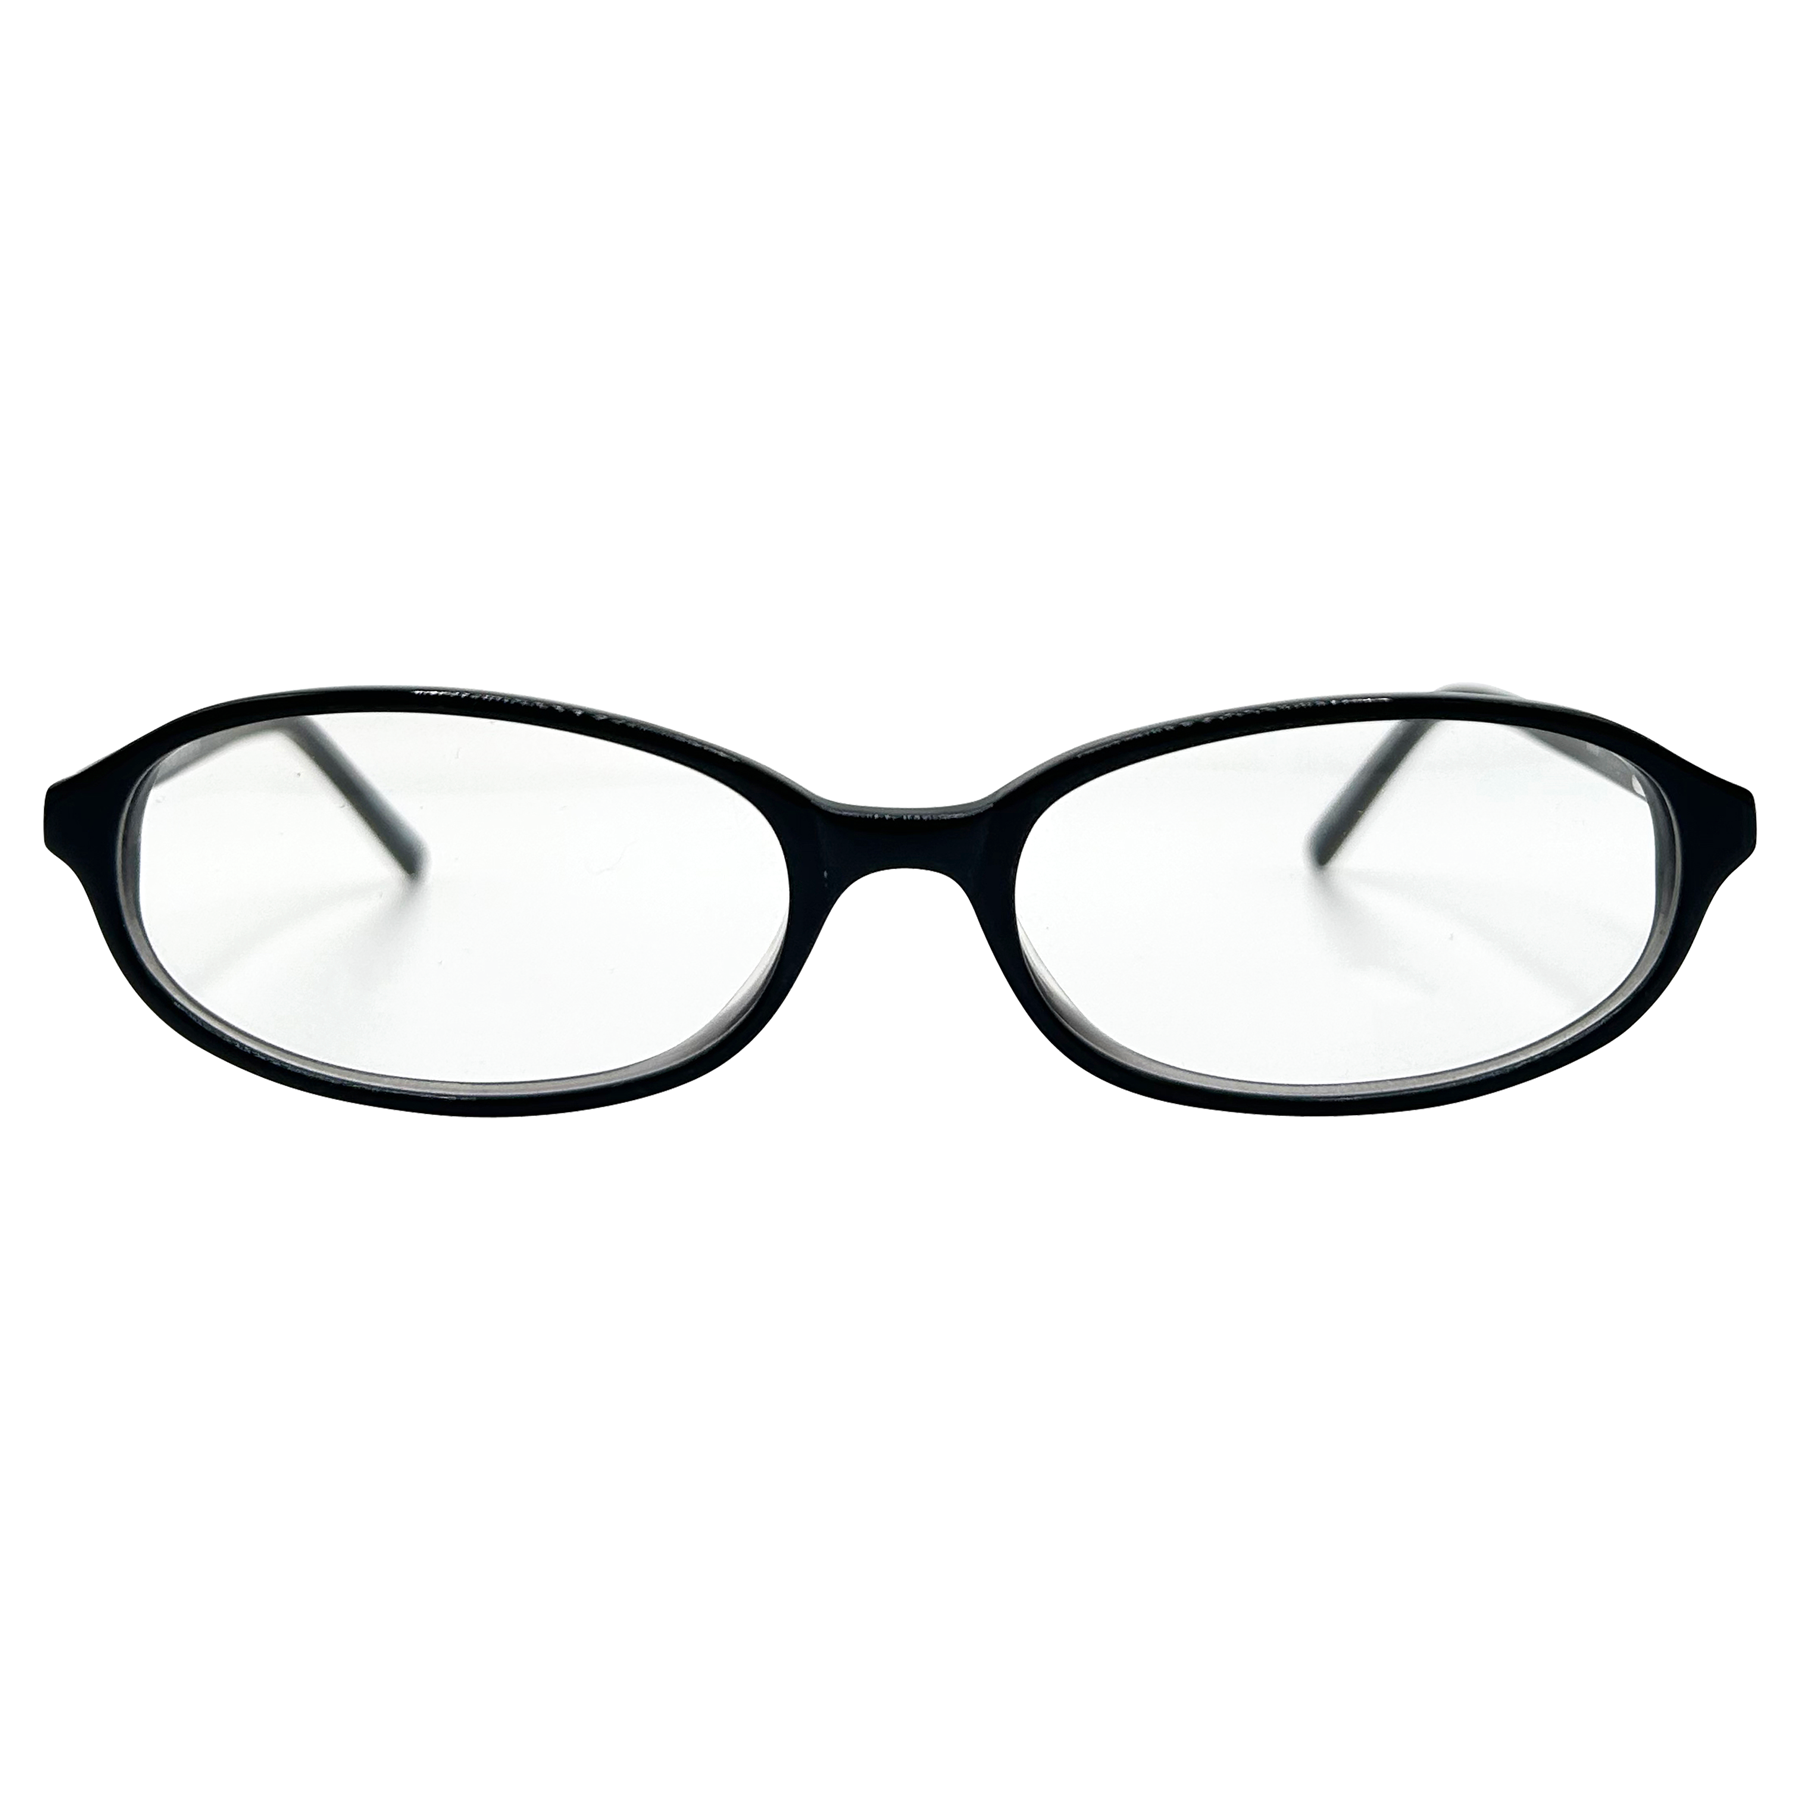 ITTY BITTY Small Clear Oval 90s Glasses | Premium